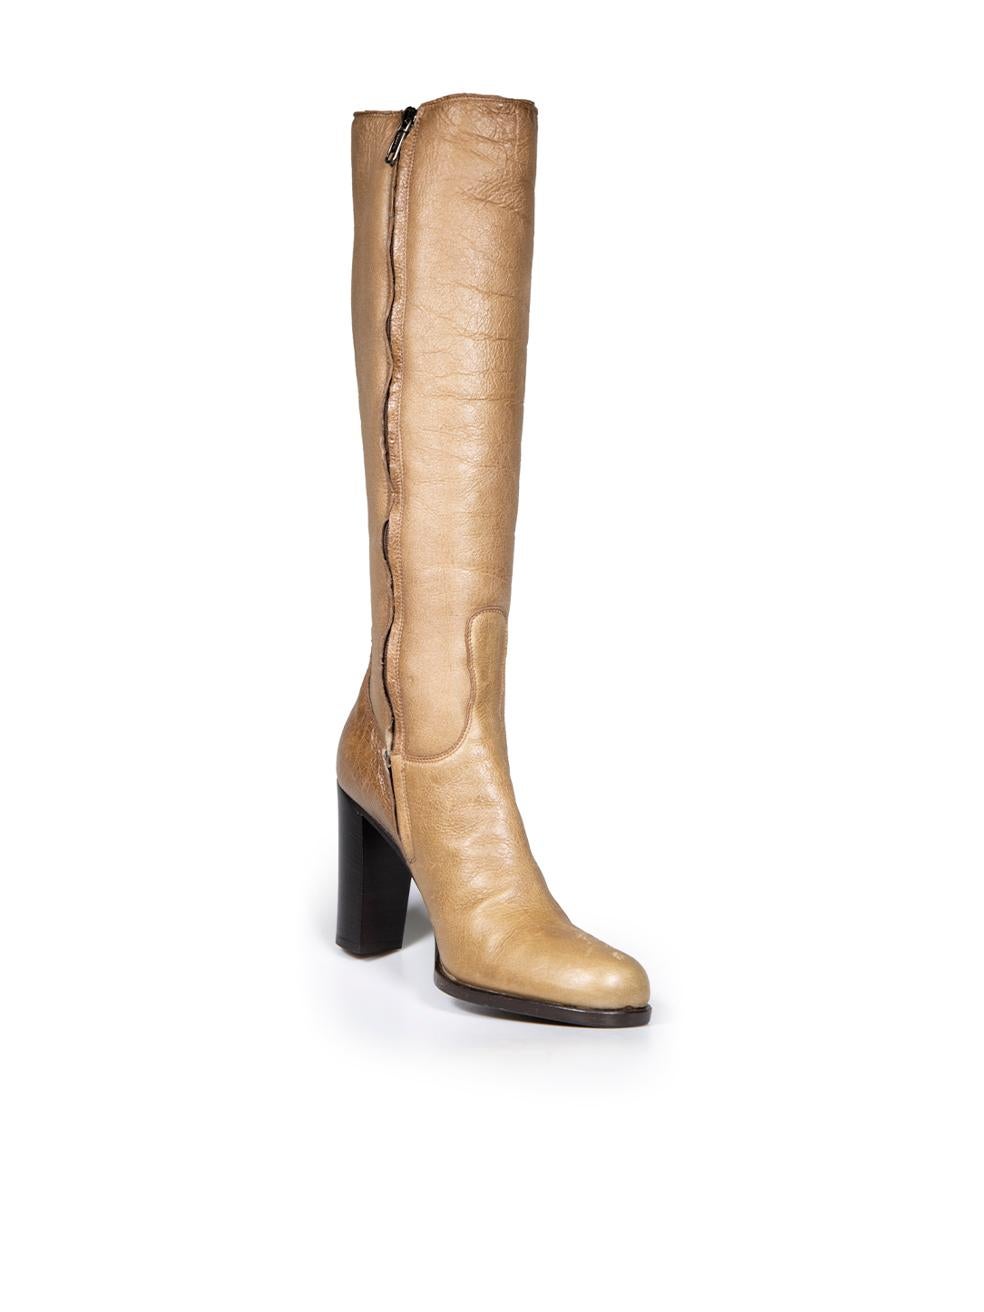 CONDITION is Very good. Minimal wear to boots is evident. Minimal wear to both boot toes and heels with abrasions to the leather on this used Jil Sander designer resale item.
 
 
 
 Details
 
 
 Camel
 
 Leather
 
 Knee high boots
 
 Shearling wool